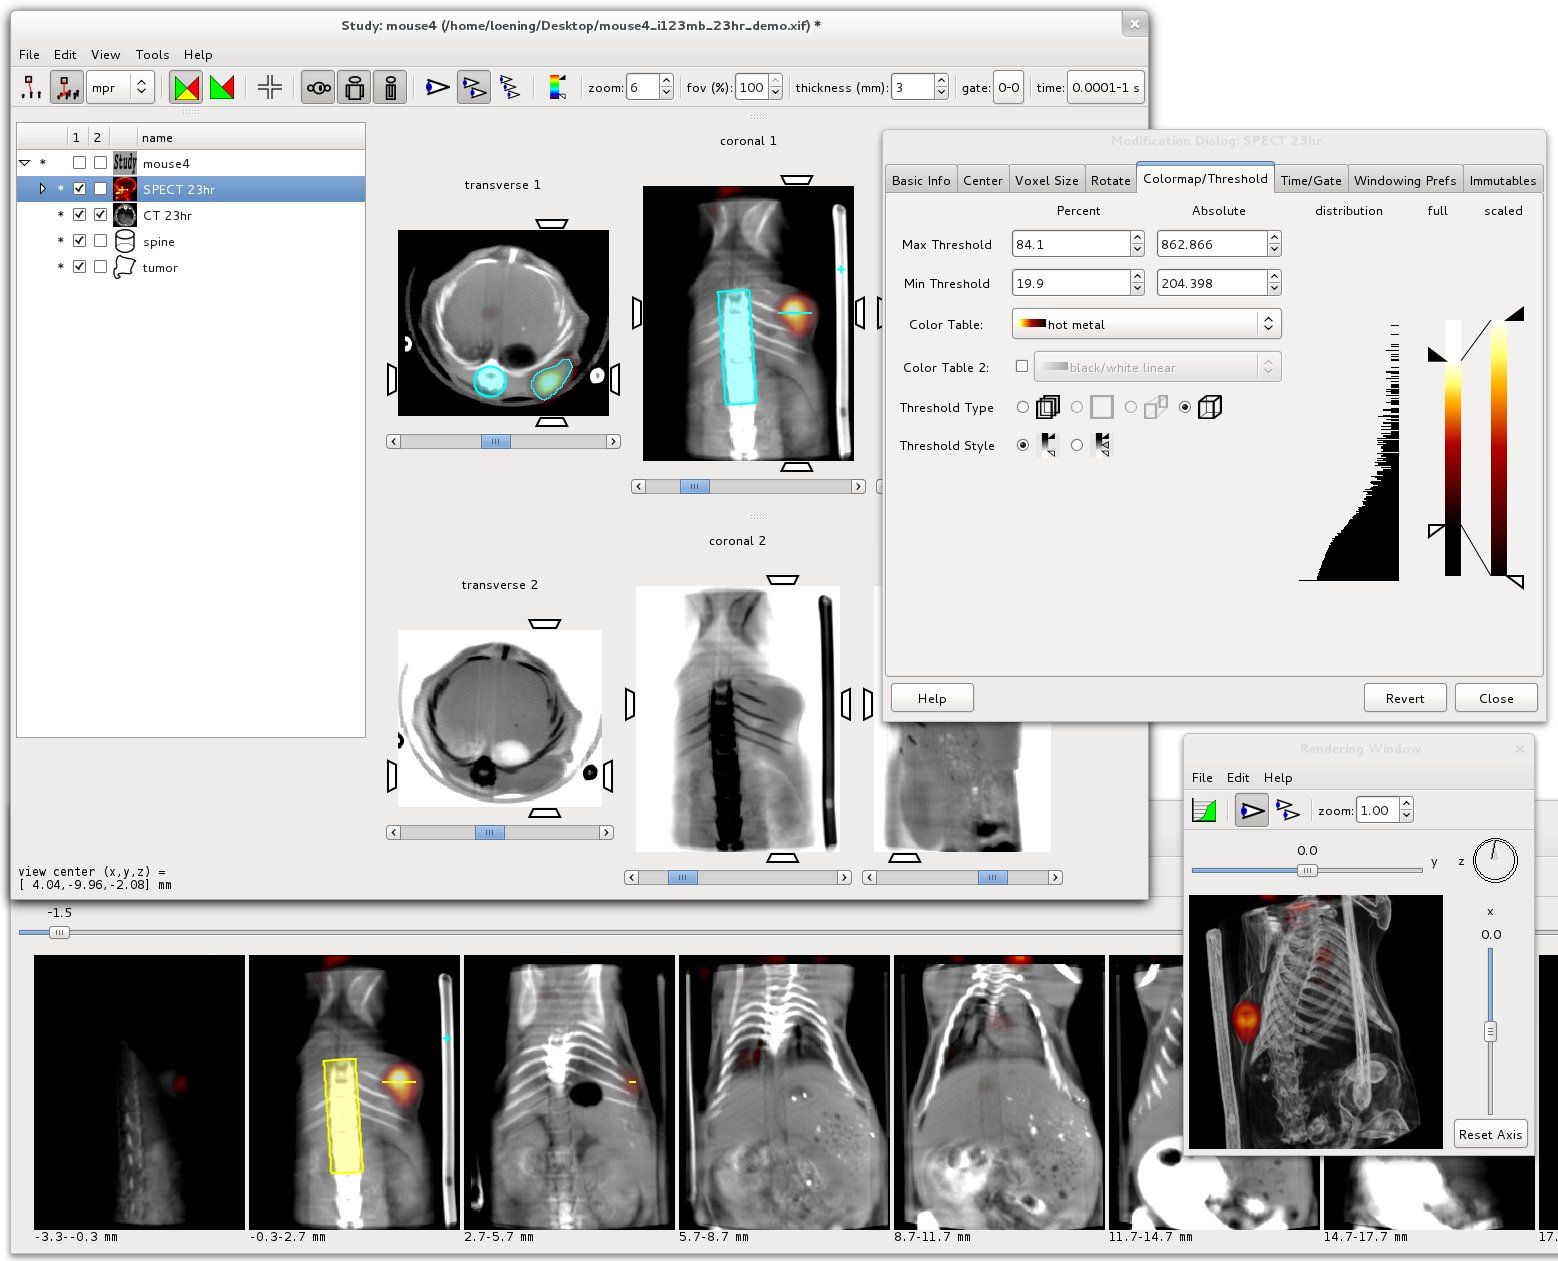 AMIDE: Open-source, free DICOM viewer for volumetric imaging